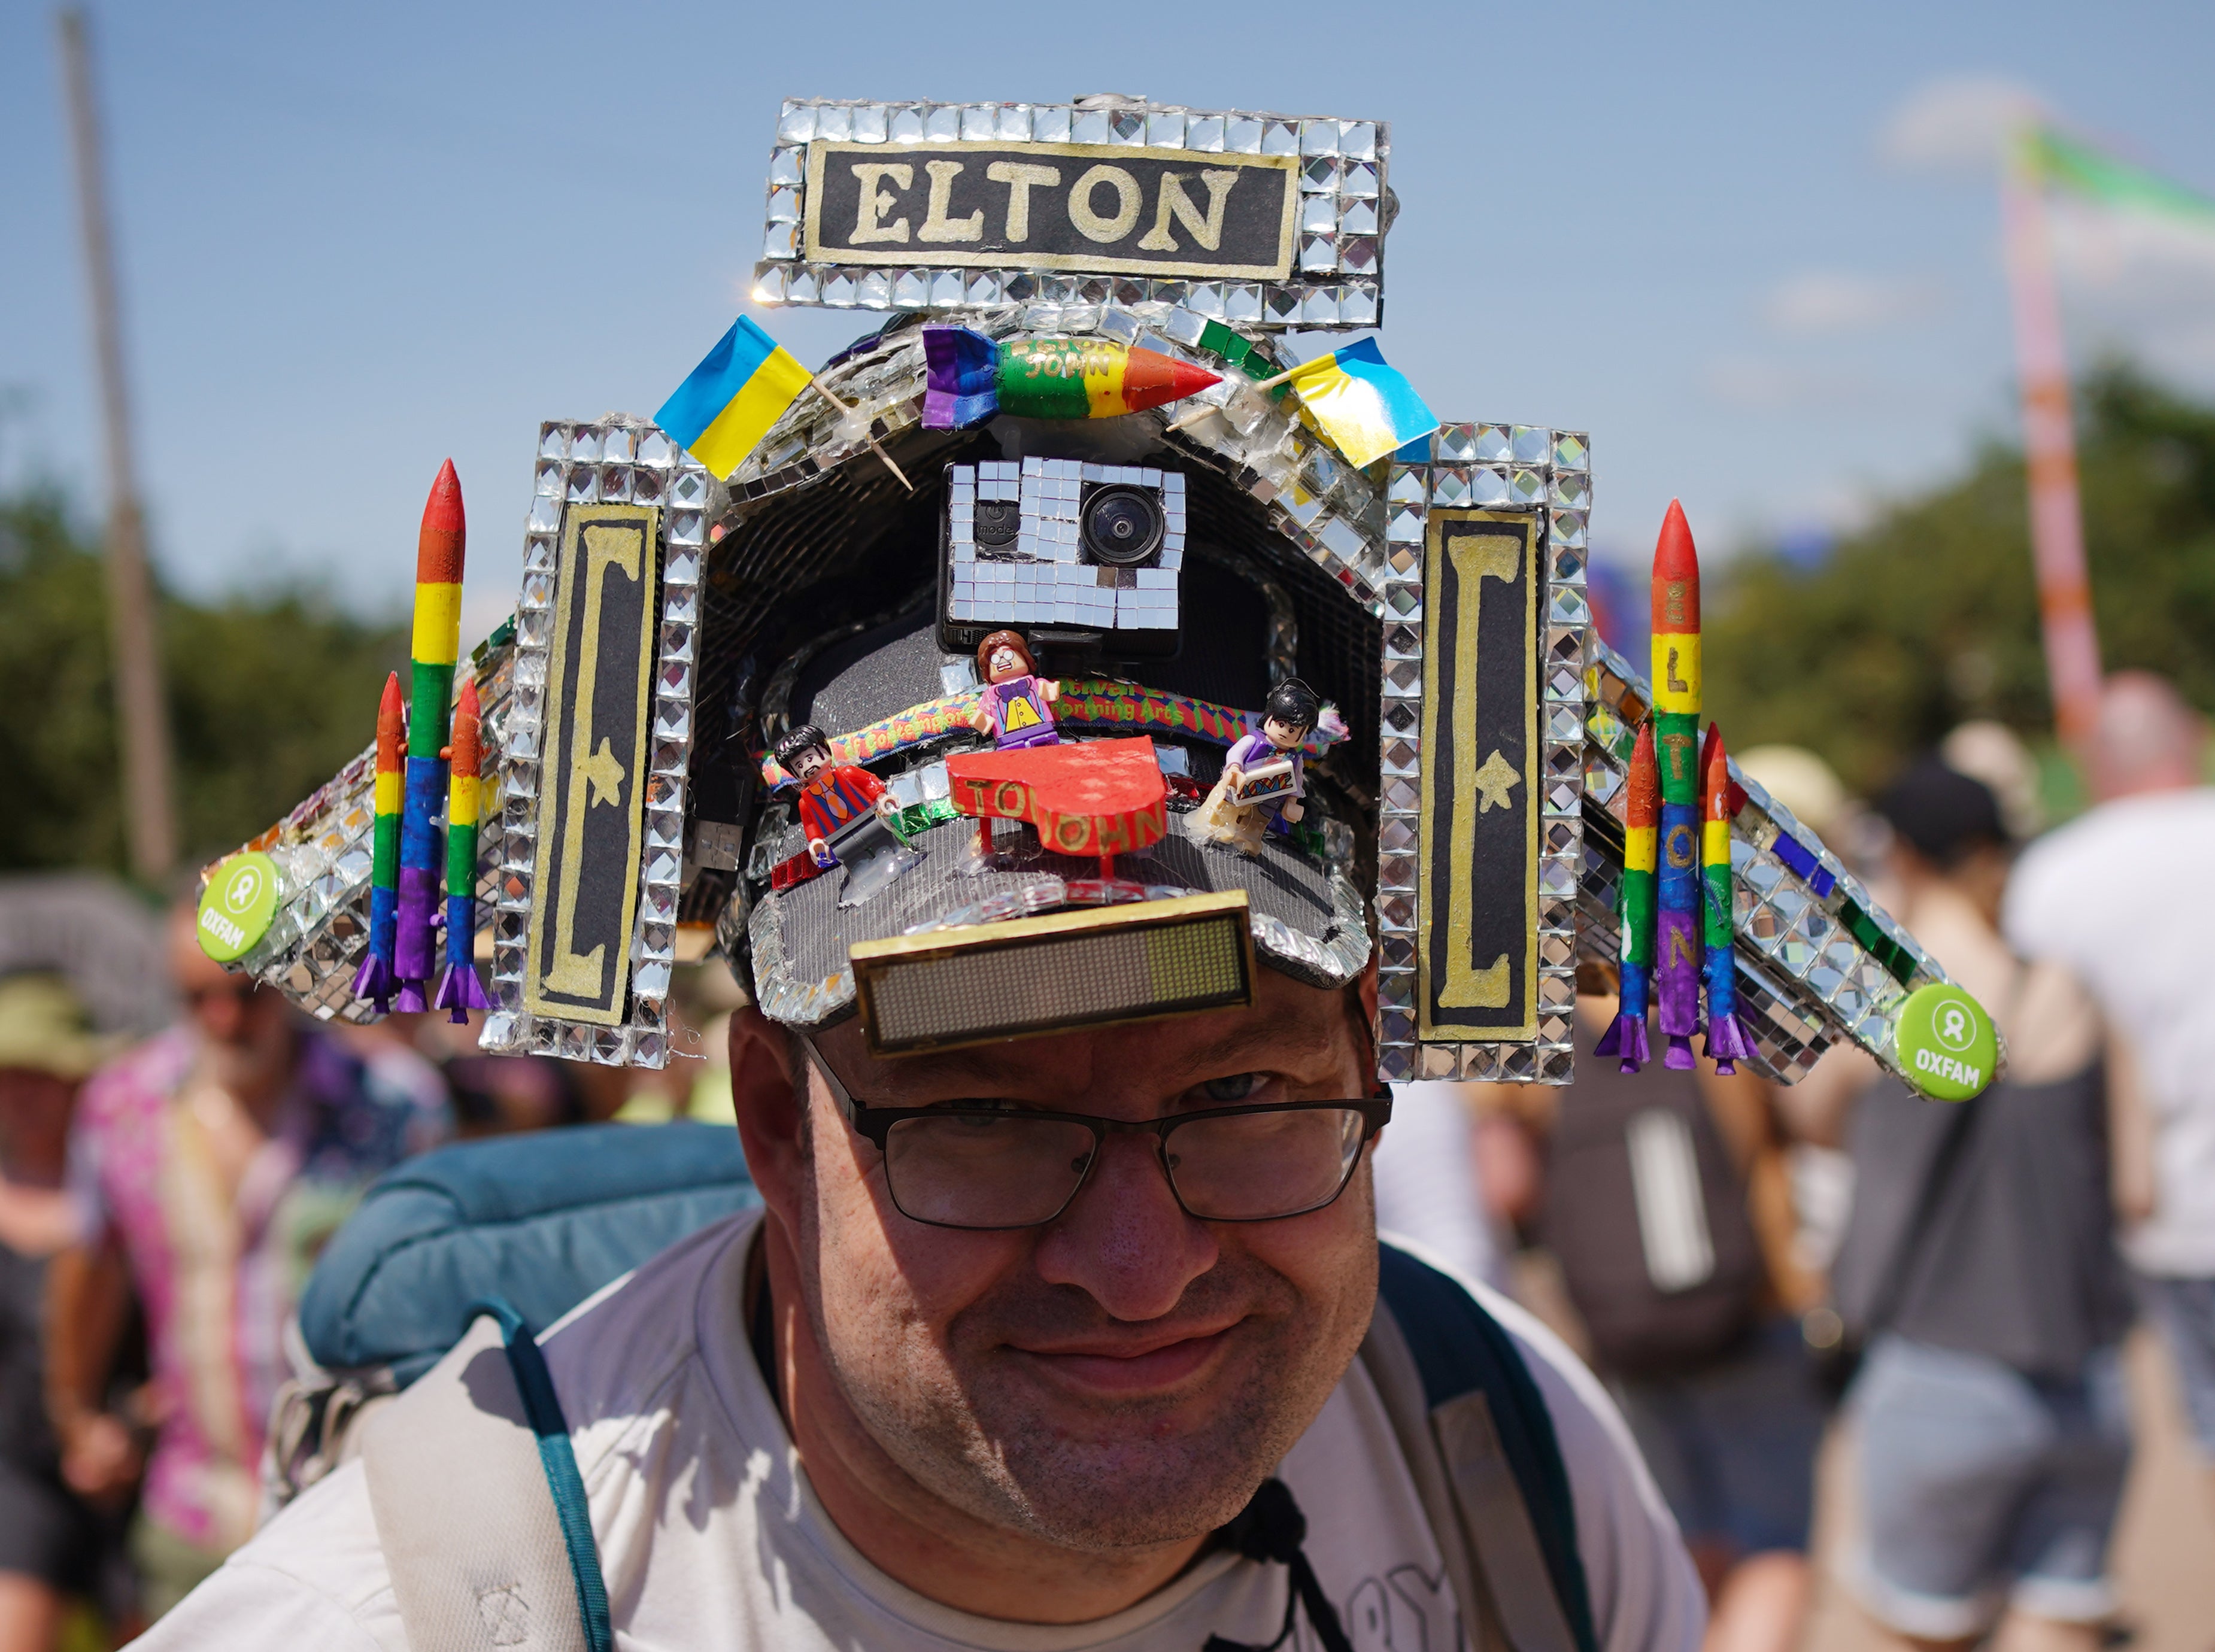 Festivalgoer Alex McGuire, from Taunton, wearing an Elton John Pyramid Stage hat at the Glastonbury Festival